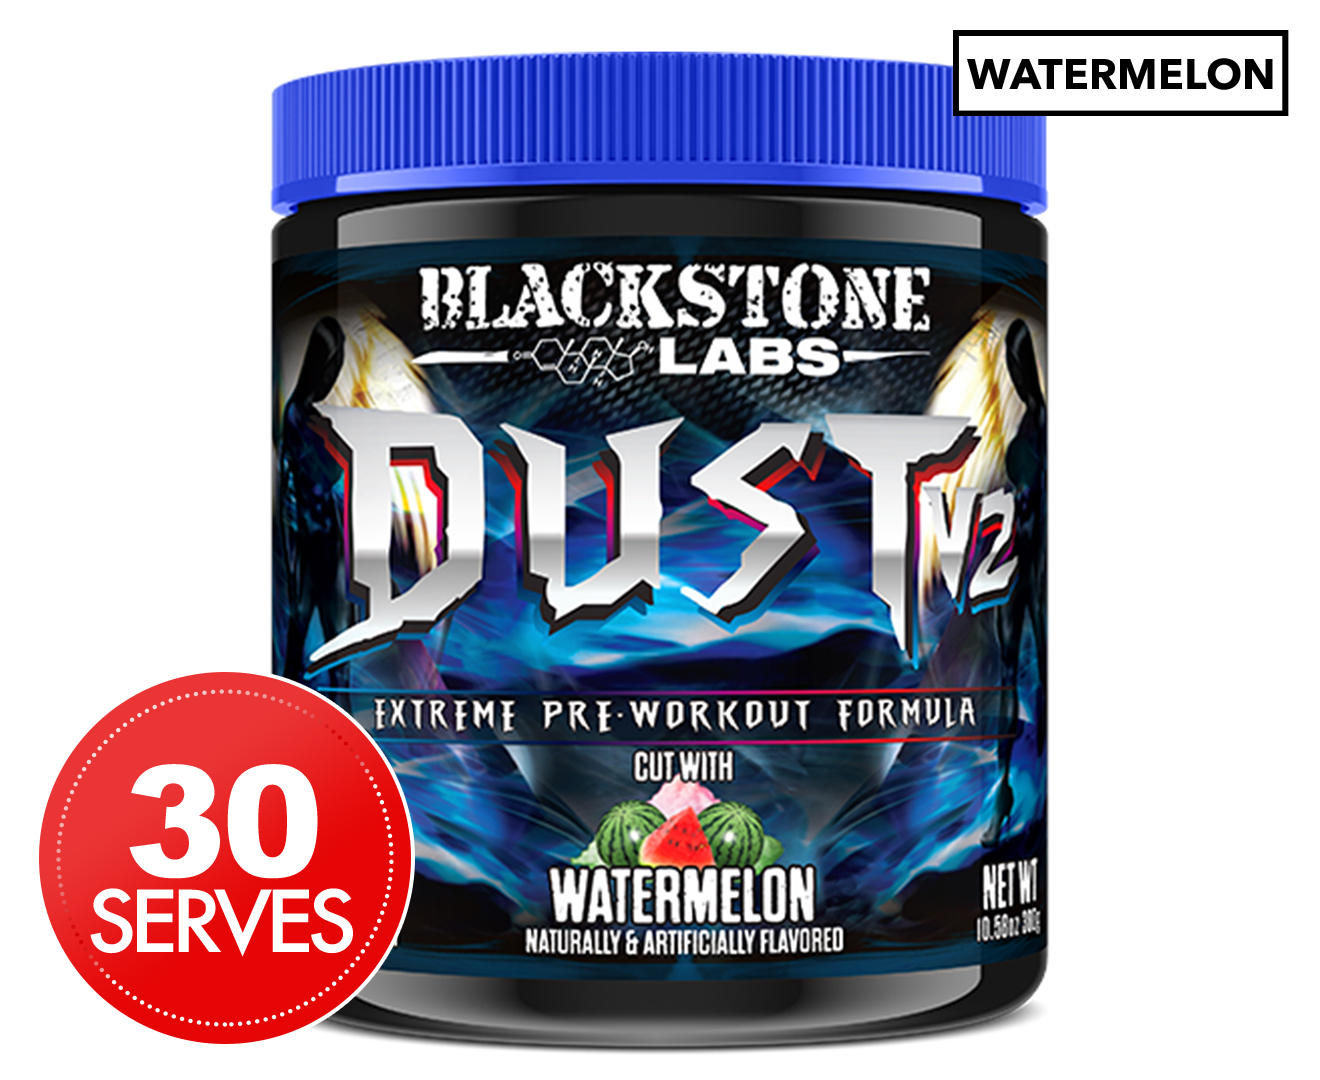 15 Minute Blackstone Labs Pre Workout Review for Beginner